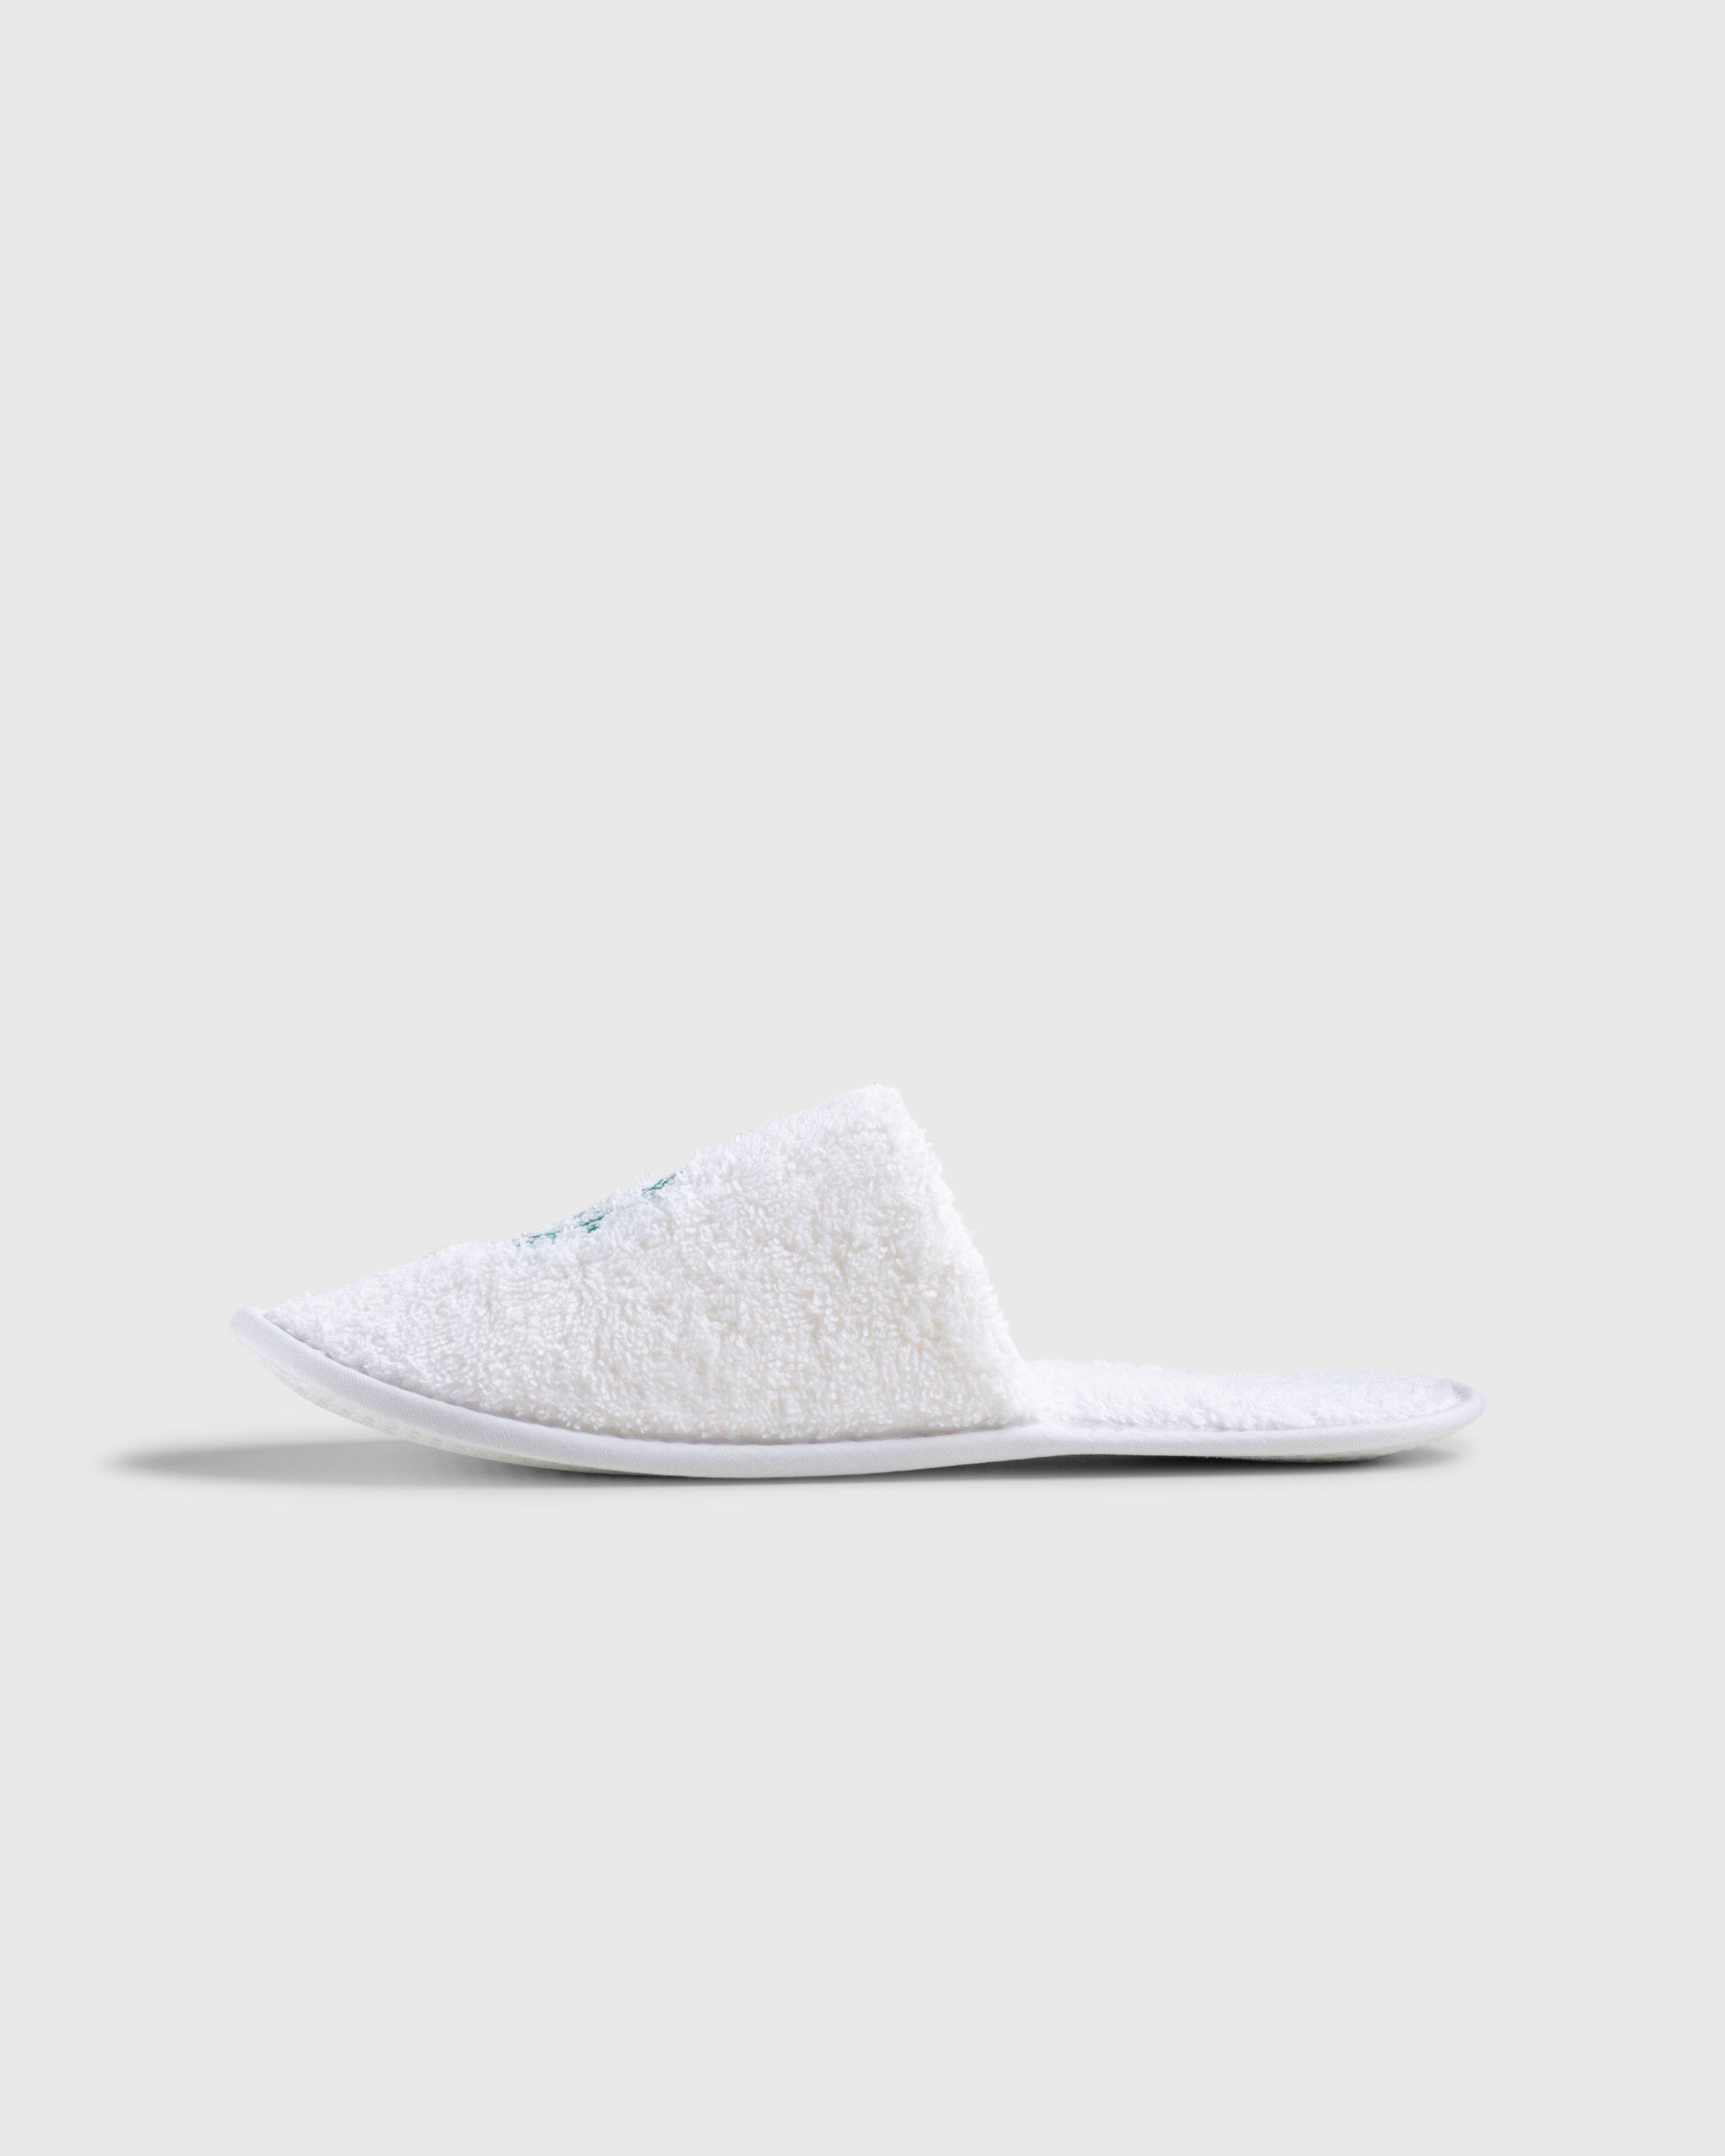 Hotel Amour x Highsnobiety - Not In Paris 4 Slippers White - Footwear - White - Image 3